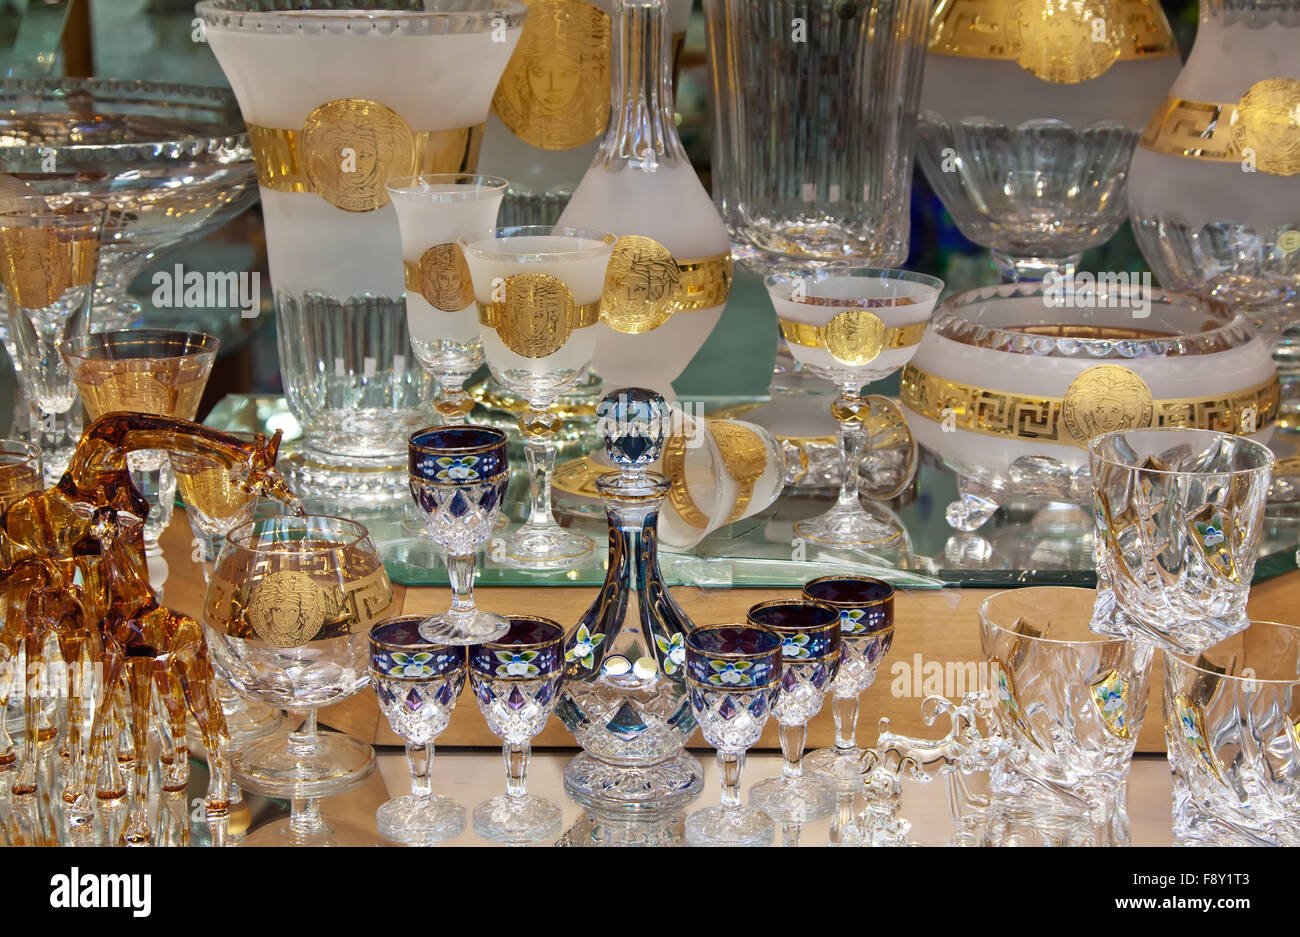 https://c8.alamy.com/comp/F8Y1T3/counter-with-bohemian-crystal-in-store-window-F8Y1T3.jpg